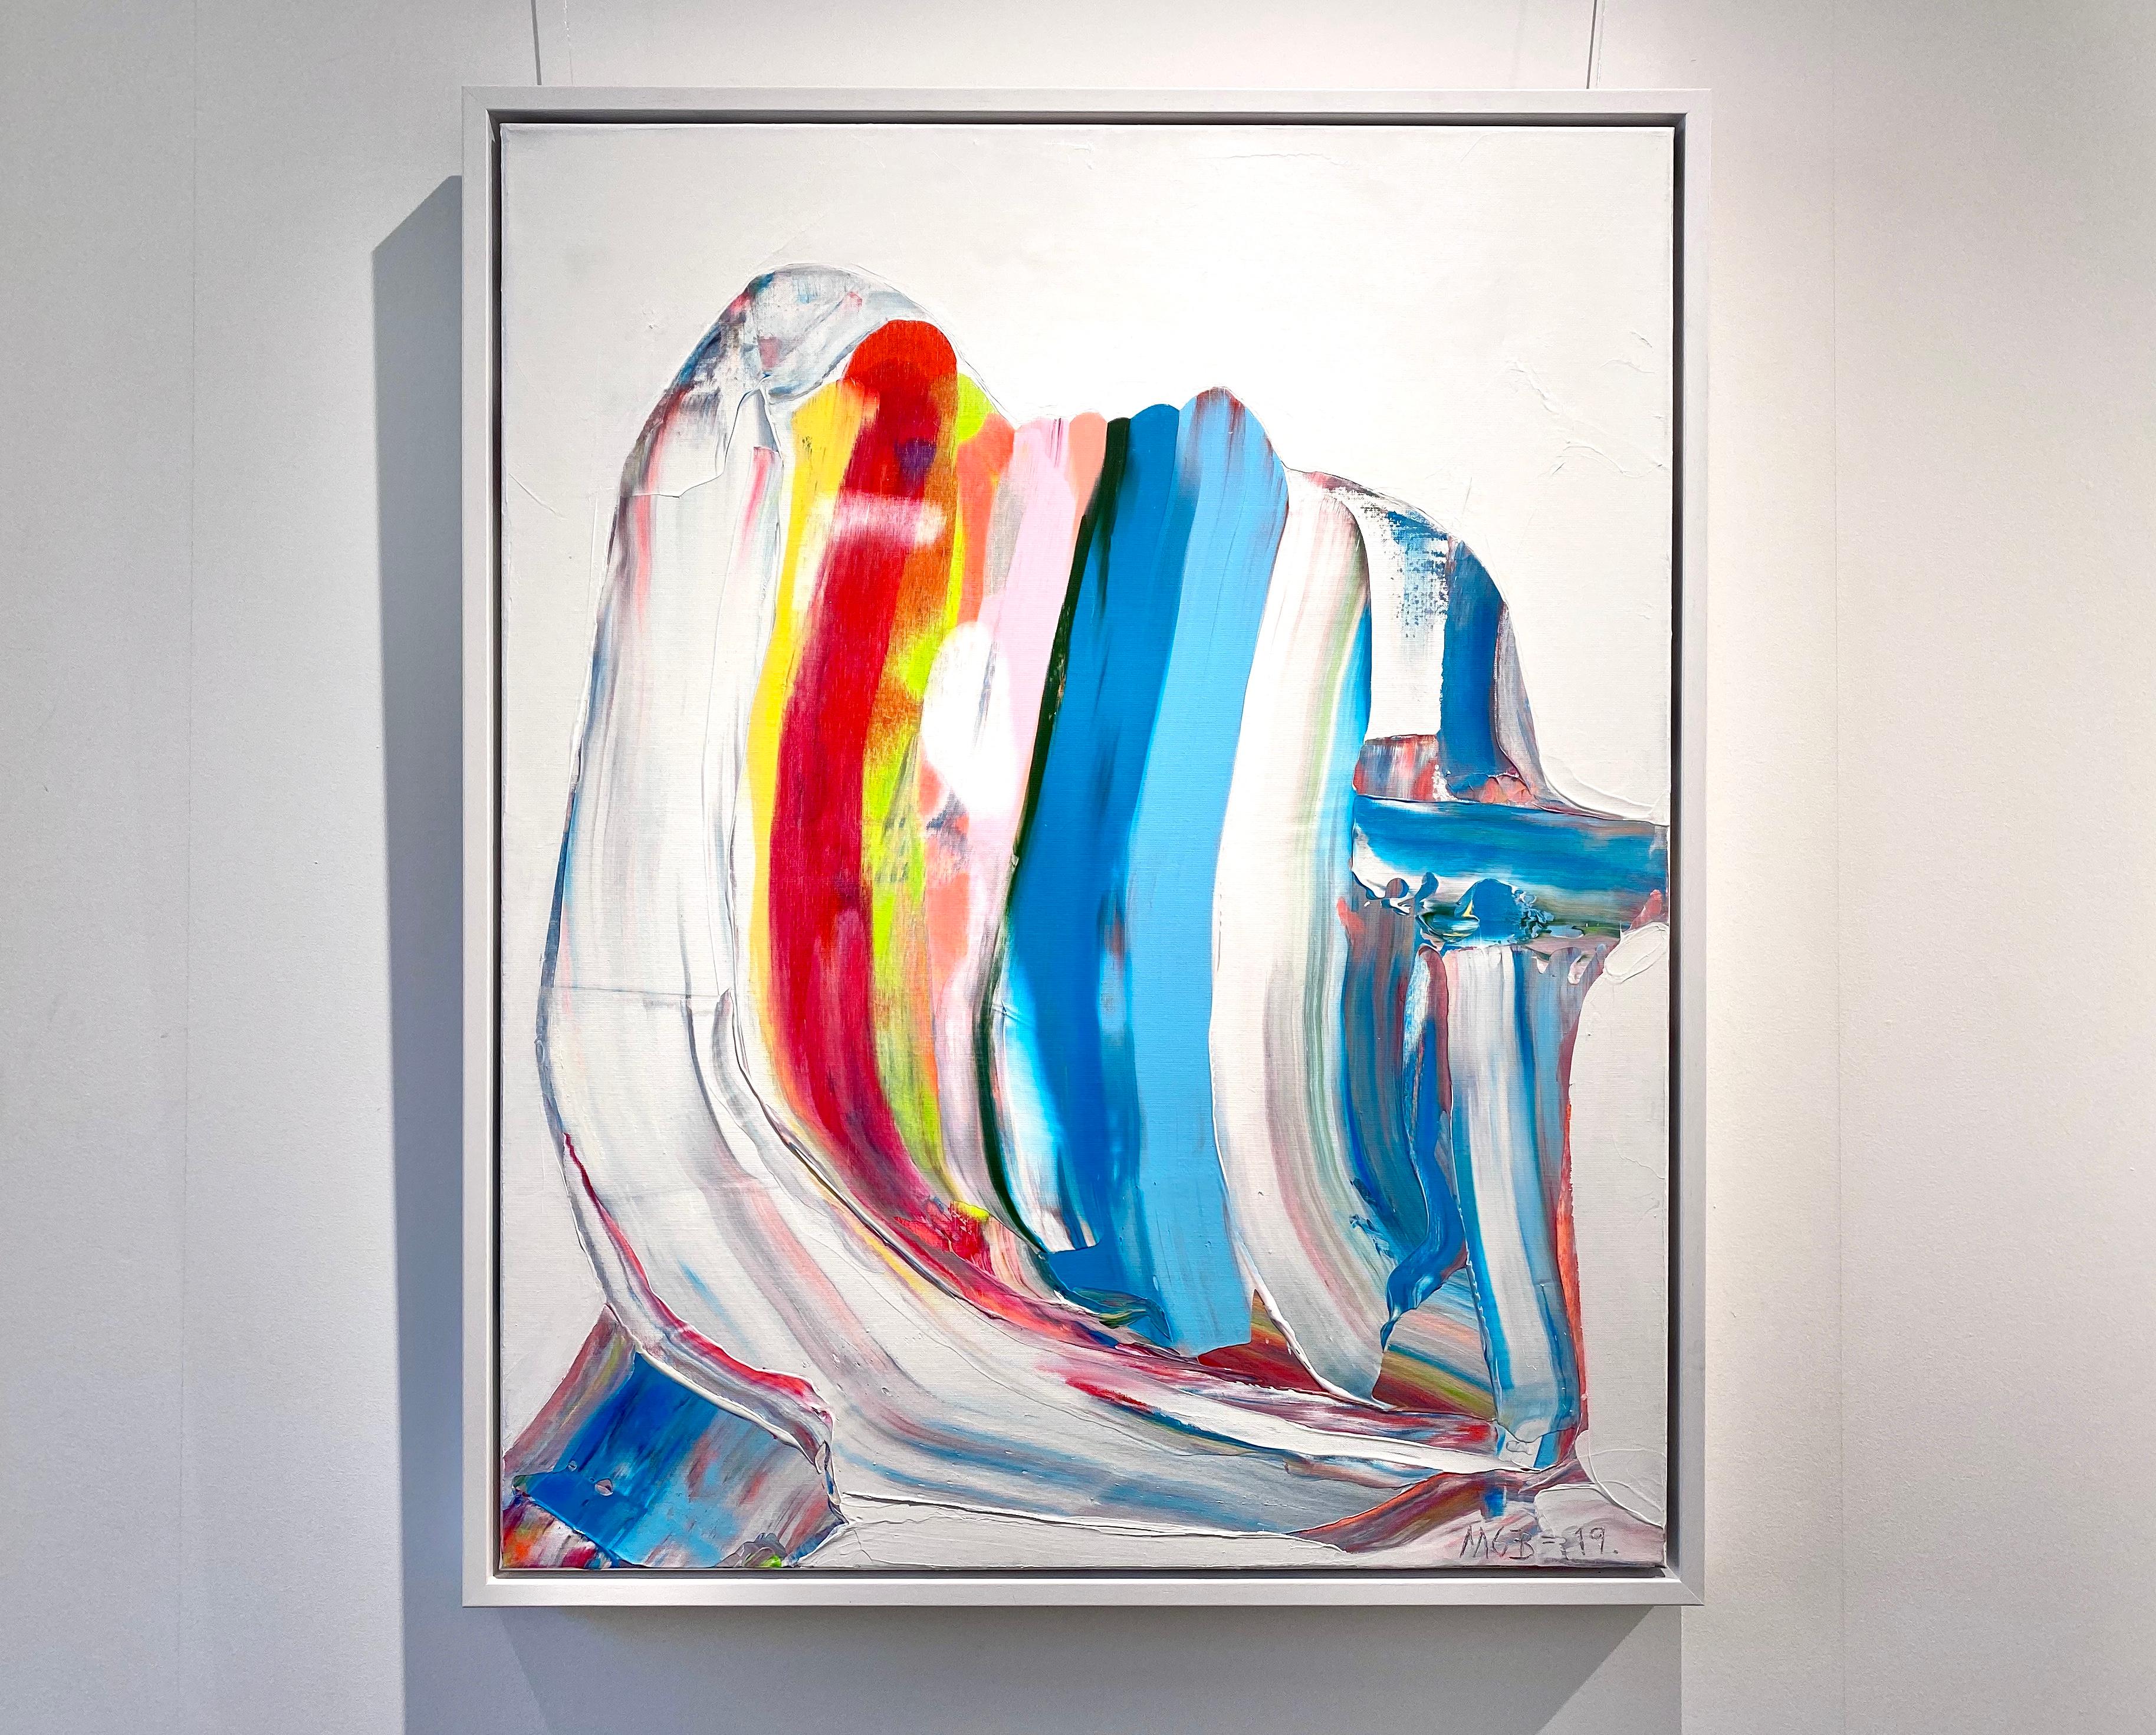 Prize winning multicolored abstract painting 'Nordic Signals' by Marit Bostad - Painting by Marit Geraldine Bostad